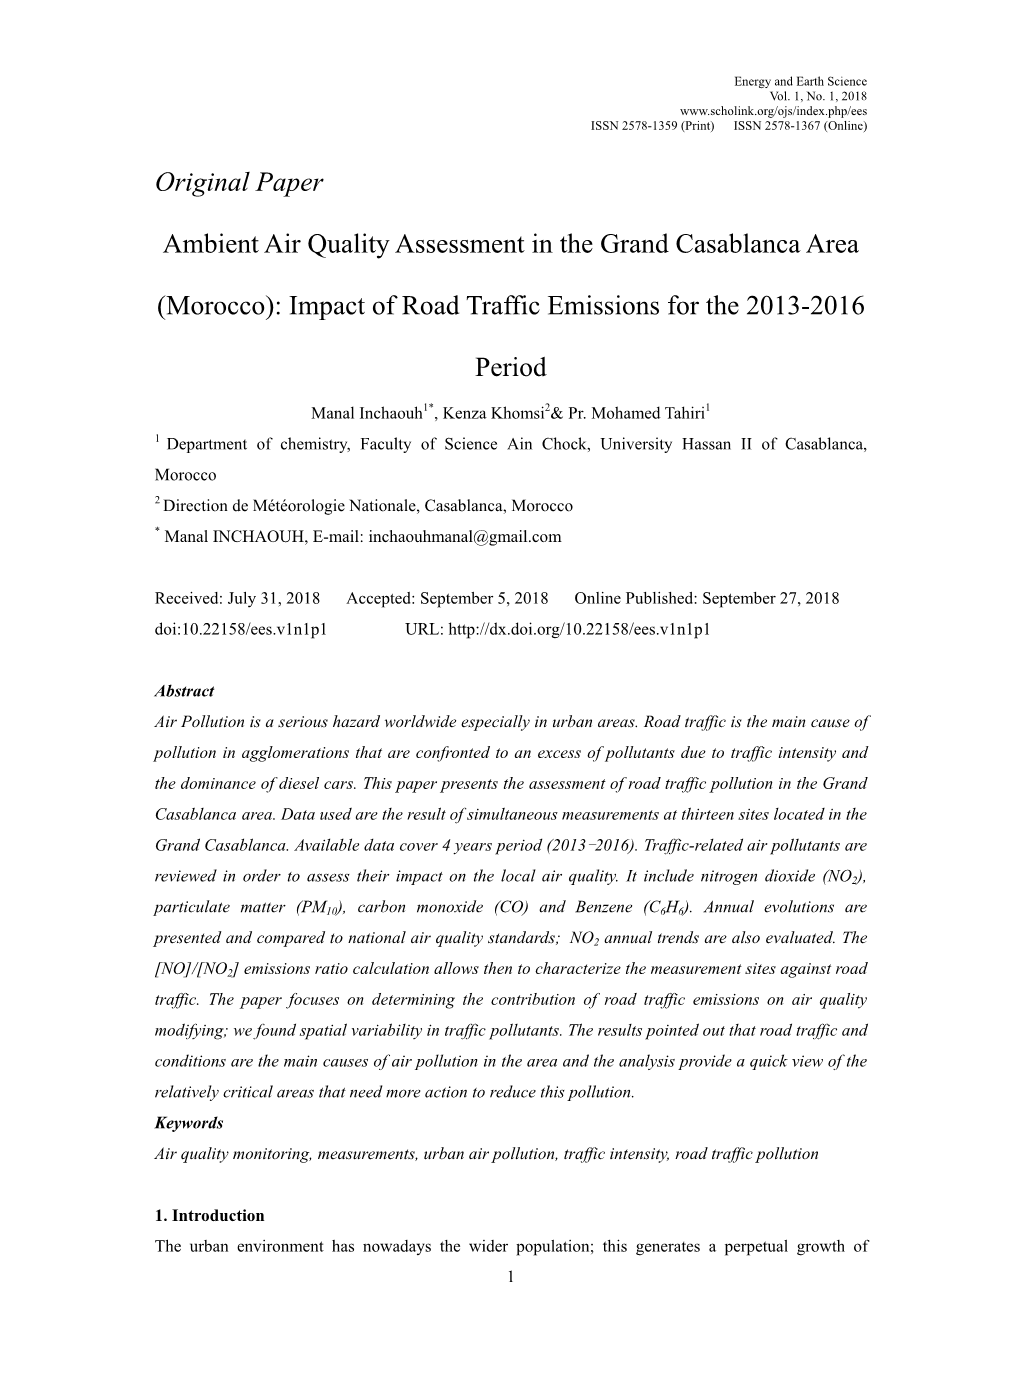 Original Paper Ambient Air Quality Assessment in the Grand Casablanca Area (Morocco): Impact of Road Traffic Emissions for the 2013-2016 Period